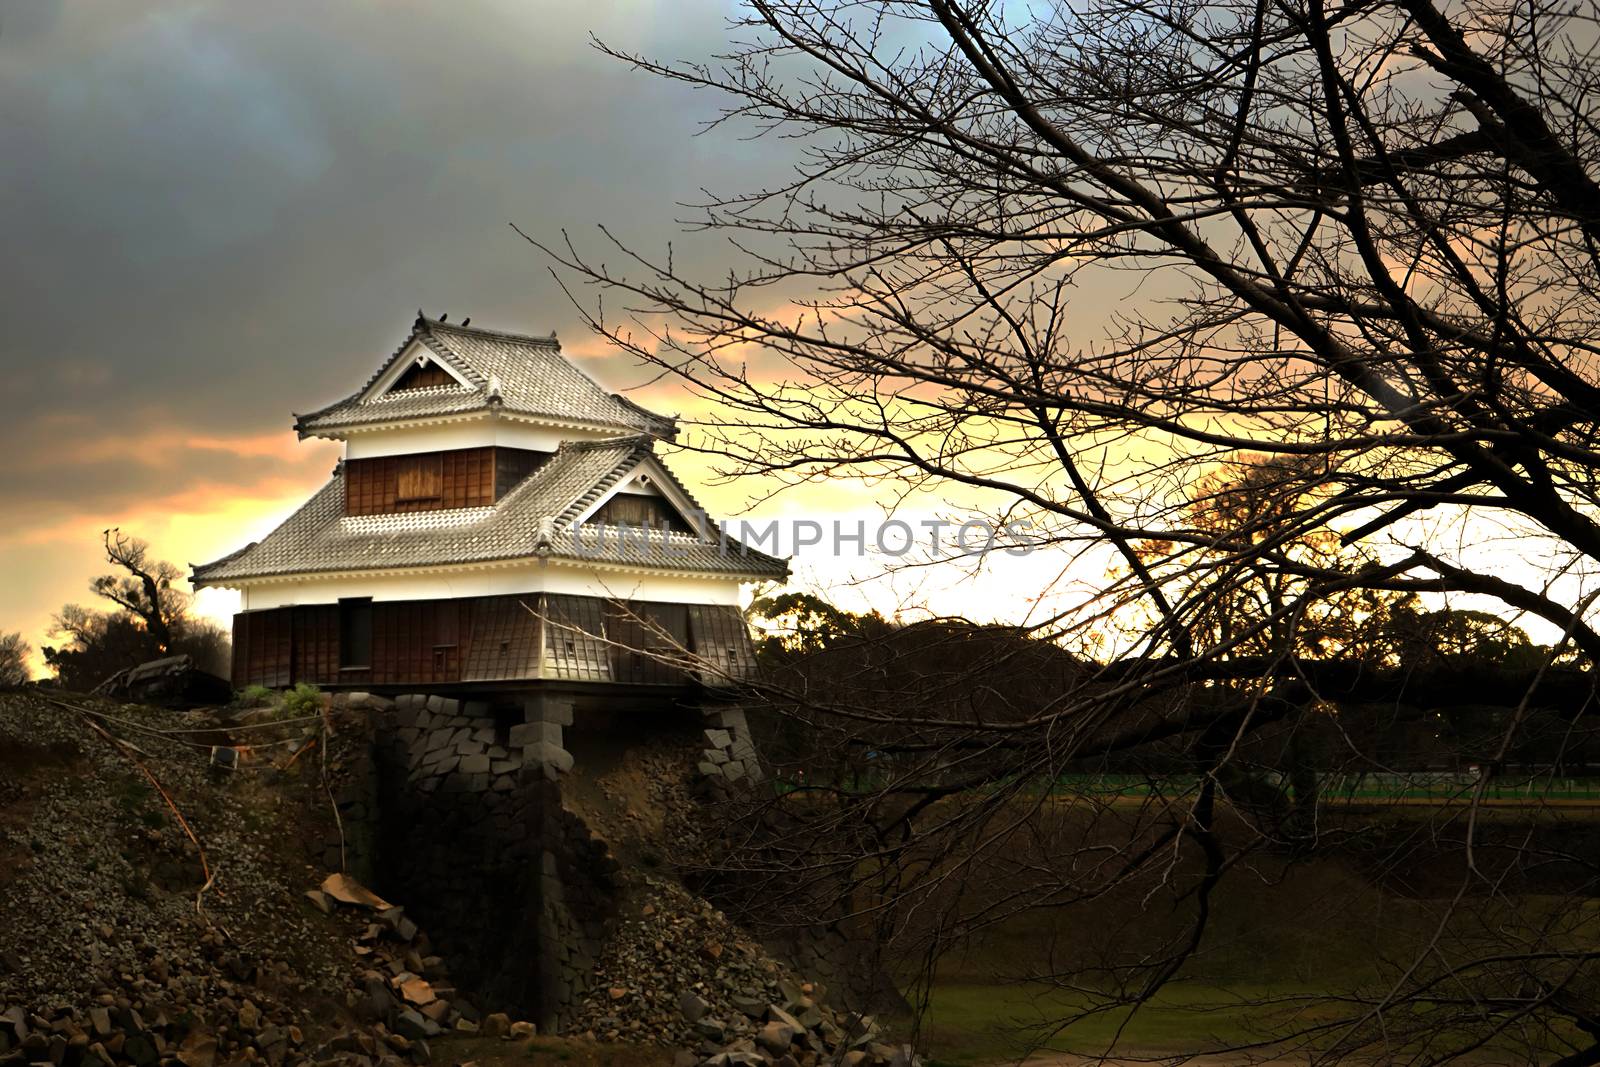 KUMAMOTO - DEC,16 : Landscape of Kumamoto castle, a hilltop Japanese castle located in Kumamoto Prefecture on the island of Kyushu.The main castle was damaged by earthquake and now repairing. JAPAN DEC,16 2016  